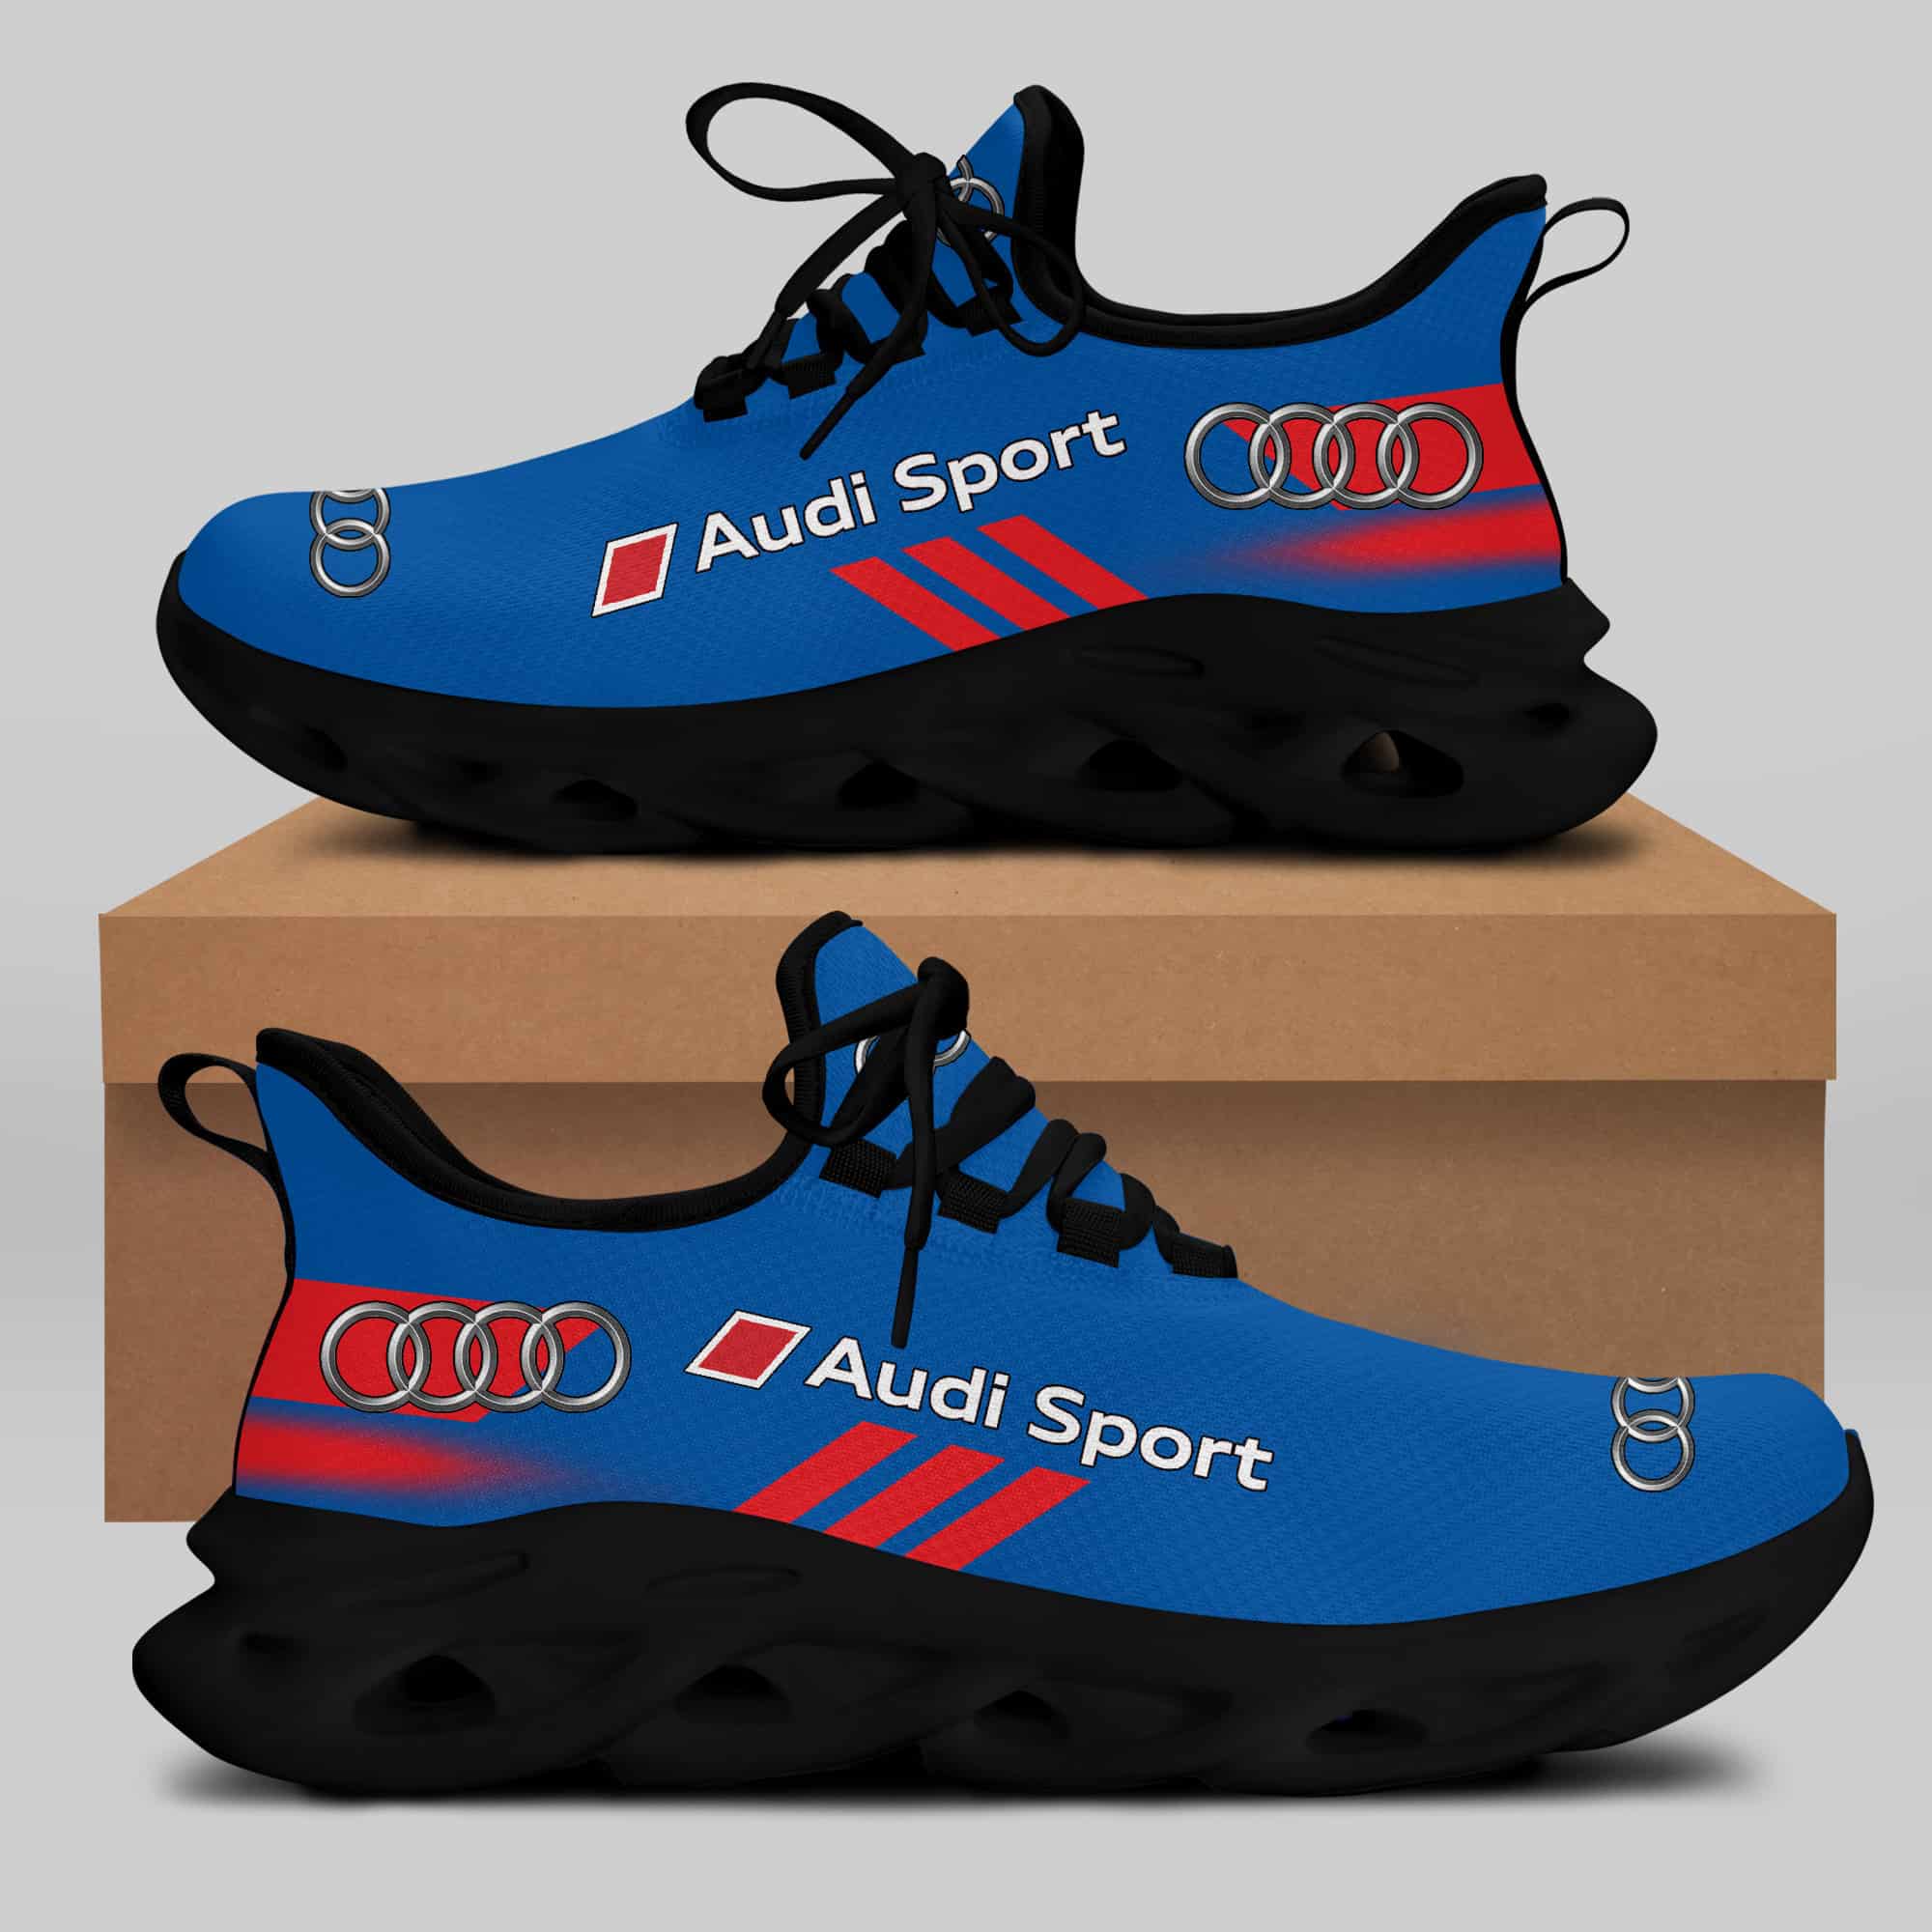 Audi Sport Running Shoes Max Soul Shoes Sneakers Ver 8 1